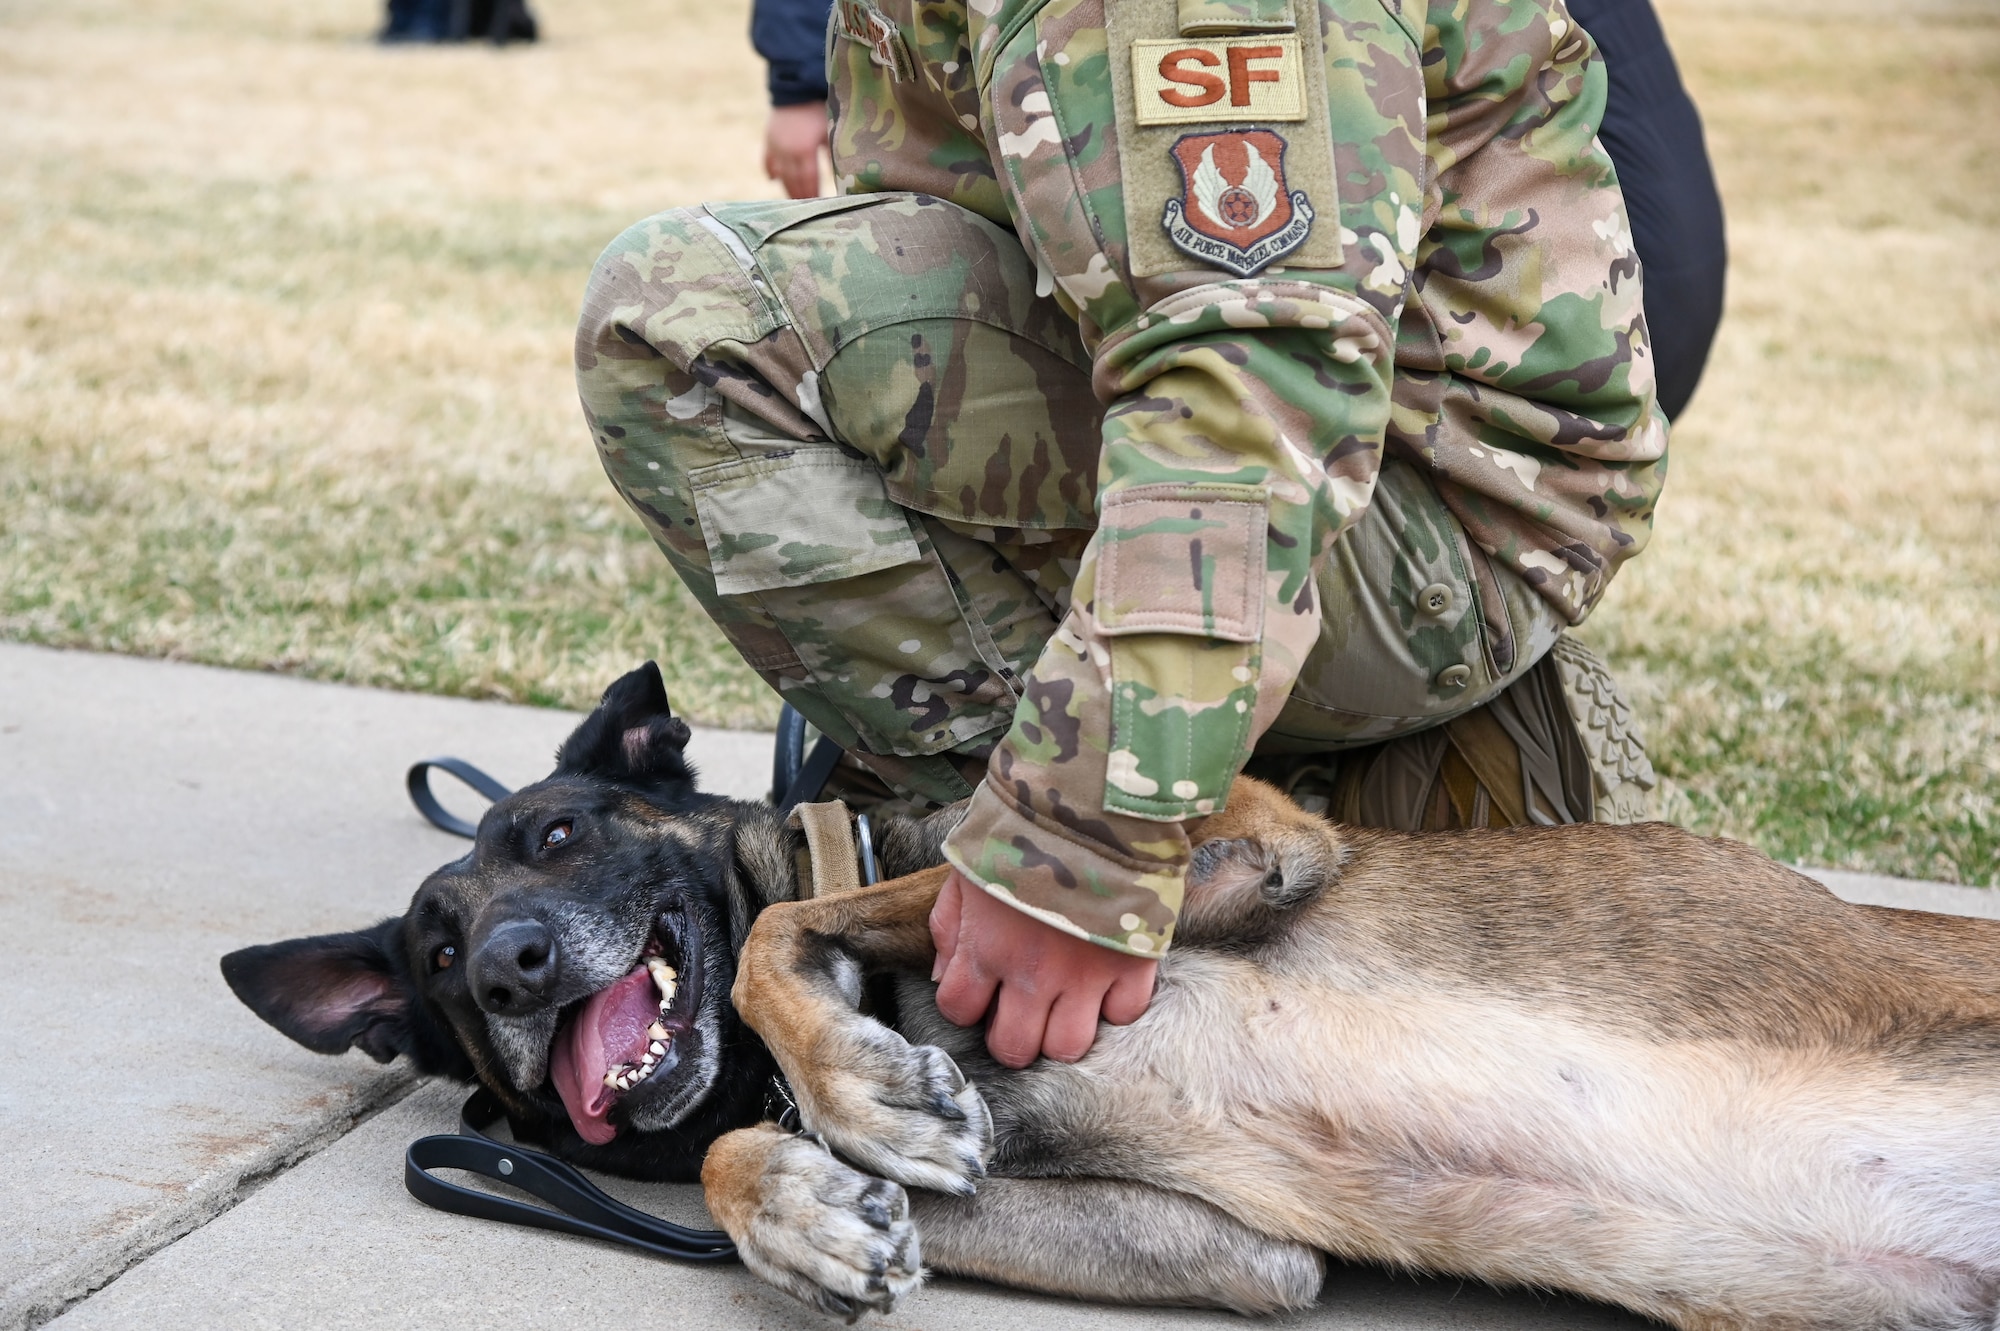 Staff Sgt. Juan Reyes,  75th Security Forces Squadron at Hill Air Force Base, Utah, pets Military Working Dog Cvoky, while attending the Vietnam Veterans War Dog Memorial dedication ceremony Mar. 13, 2021, in Layton, Utah. The memorial features a monument honoring war dogs that served during a time when they were forgotten. (U.S. Air Force photo by Cynthia Griggs)